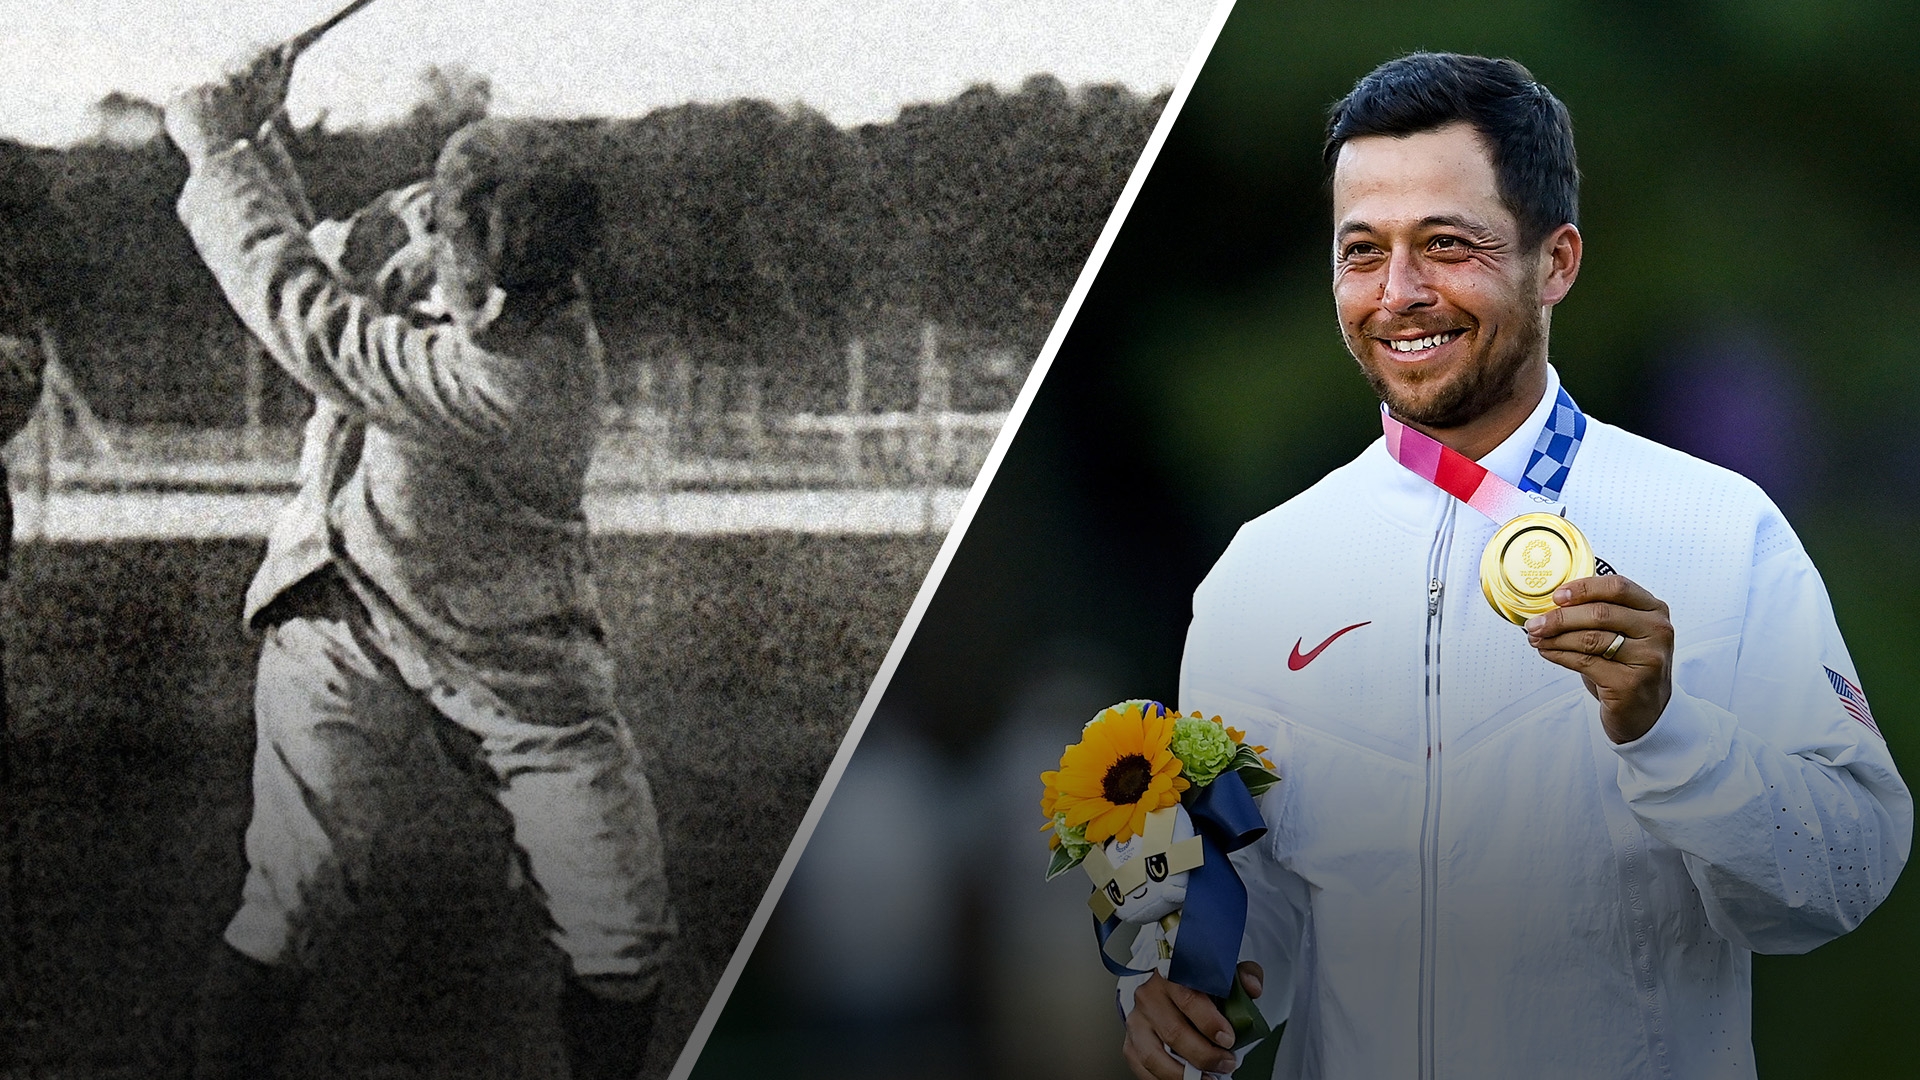 The history of golf at the Olympics